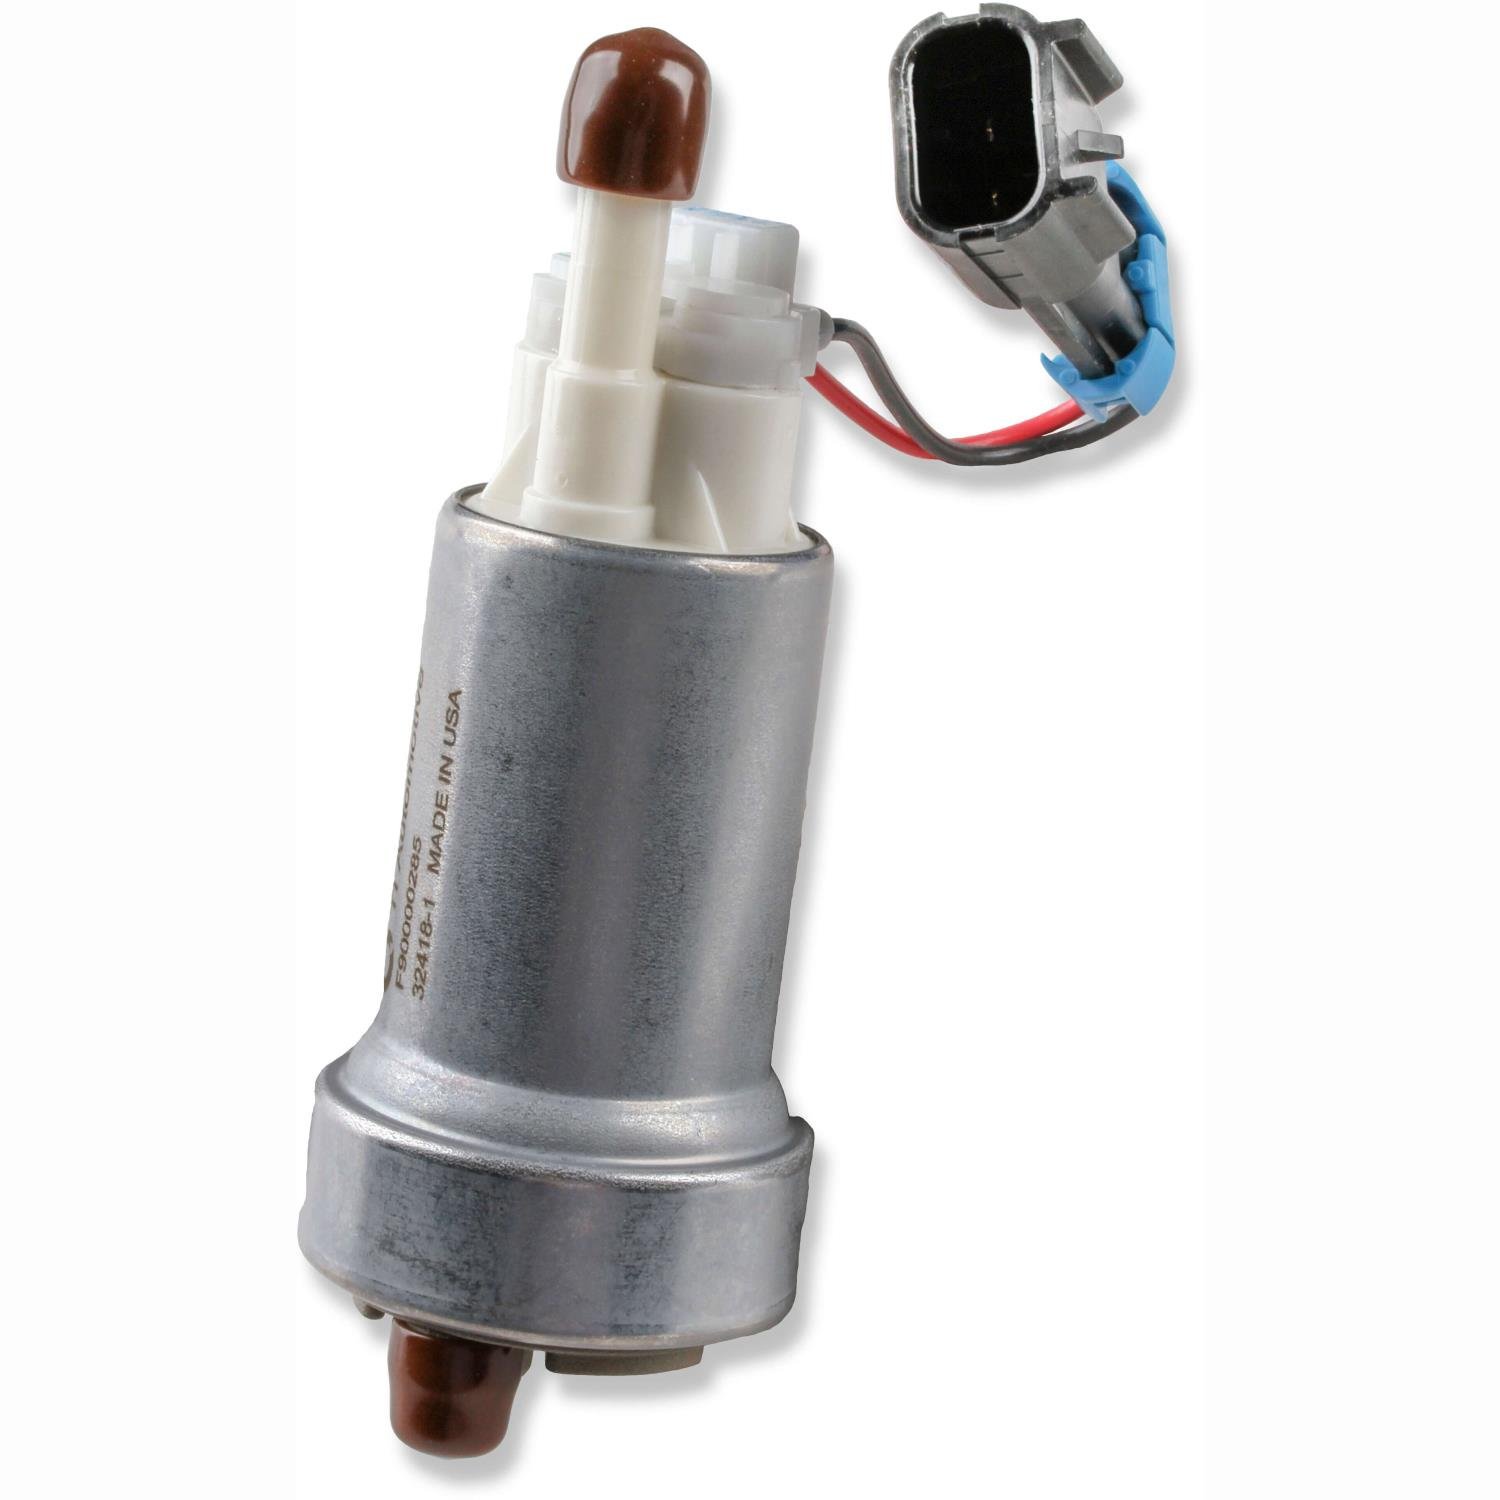 Universal In-Tank Electric Fuel Pump [470 LPH]